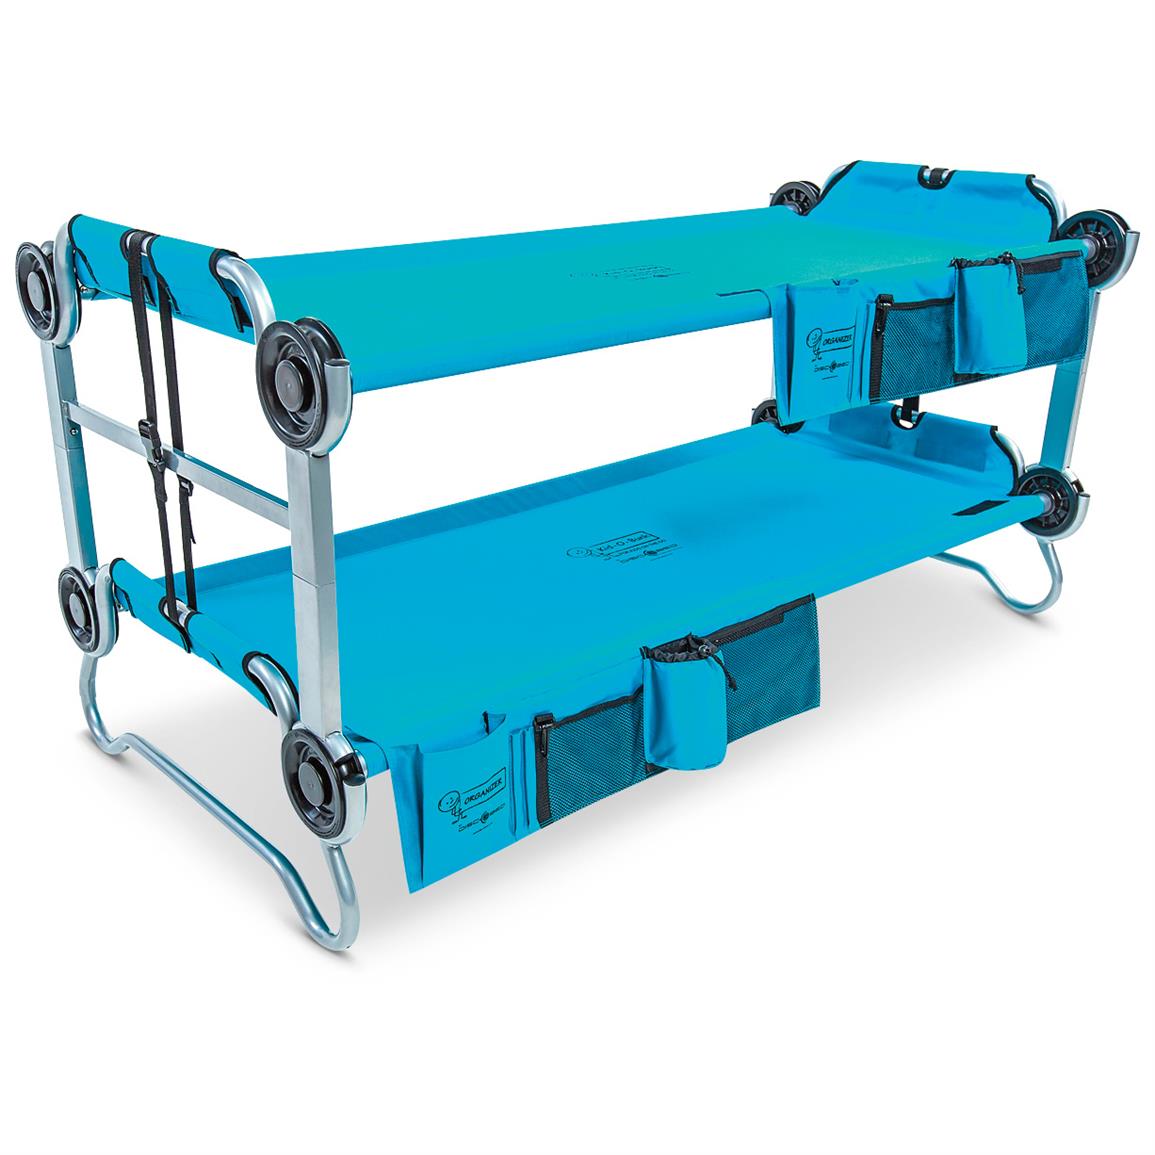 Disc-O-Bed Youth Kid-O-Bunk Portable Bunk Bed with Organizers, Teal Blue